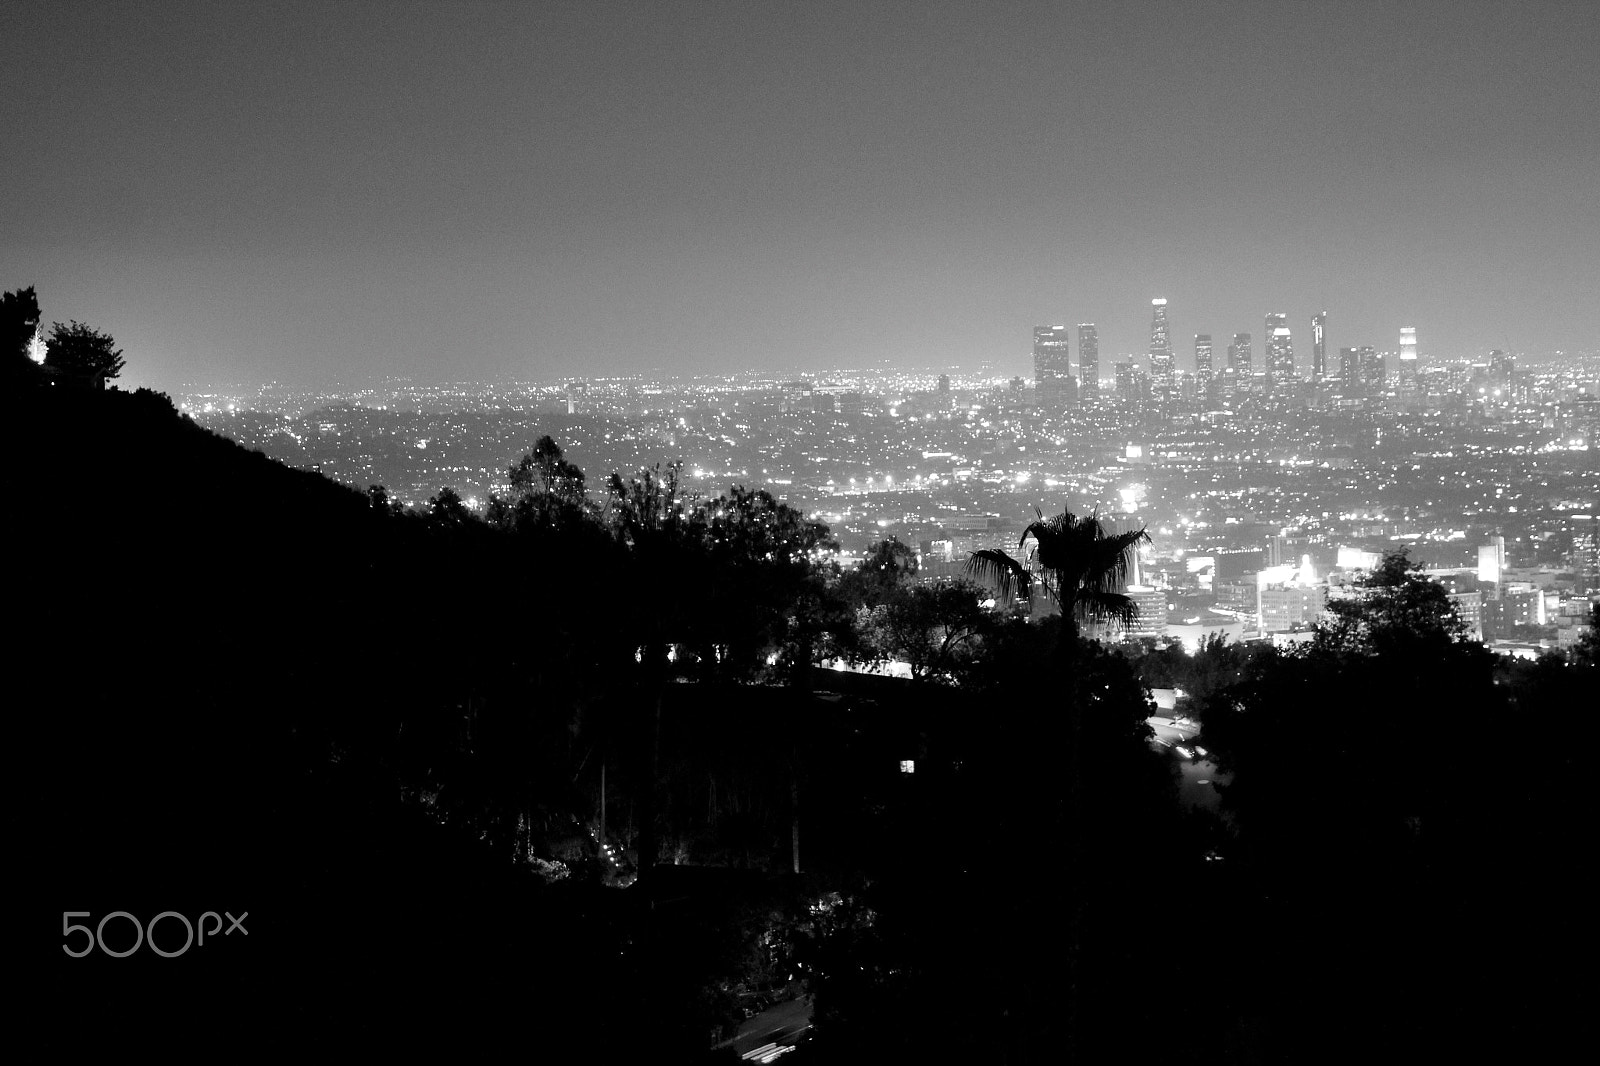 Canon EOS 60D + Sigma 24-105mm f/4 DG OS HSM | A sample photo. (los angeles at night) photography